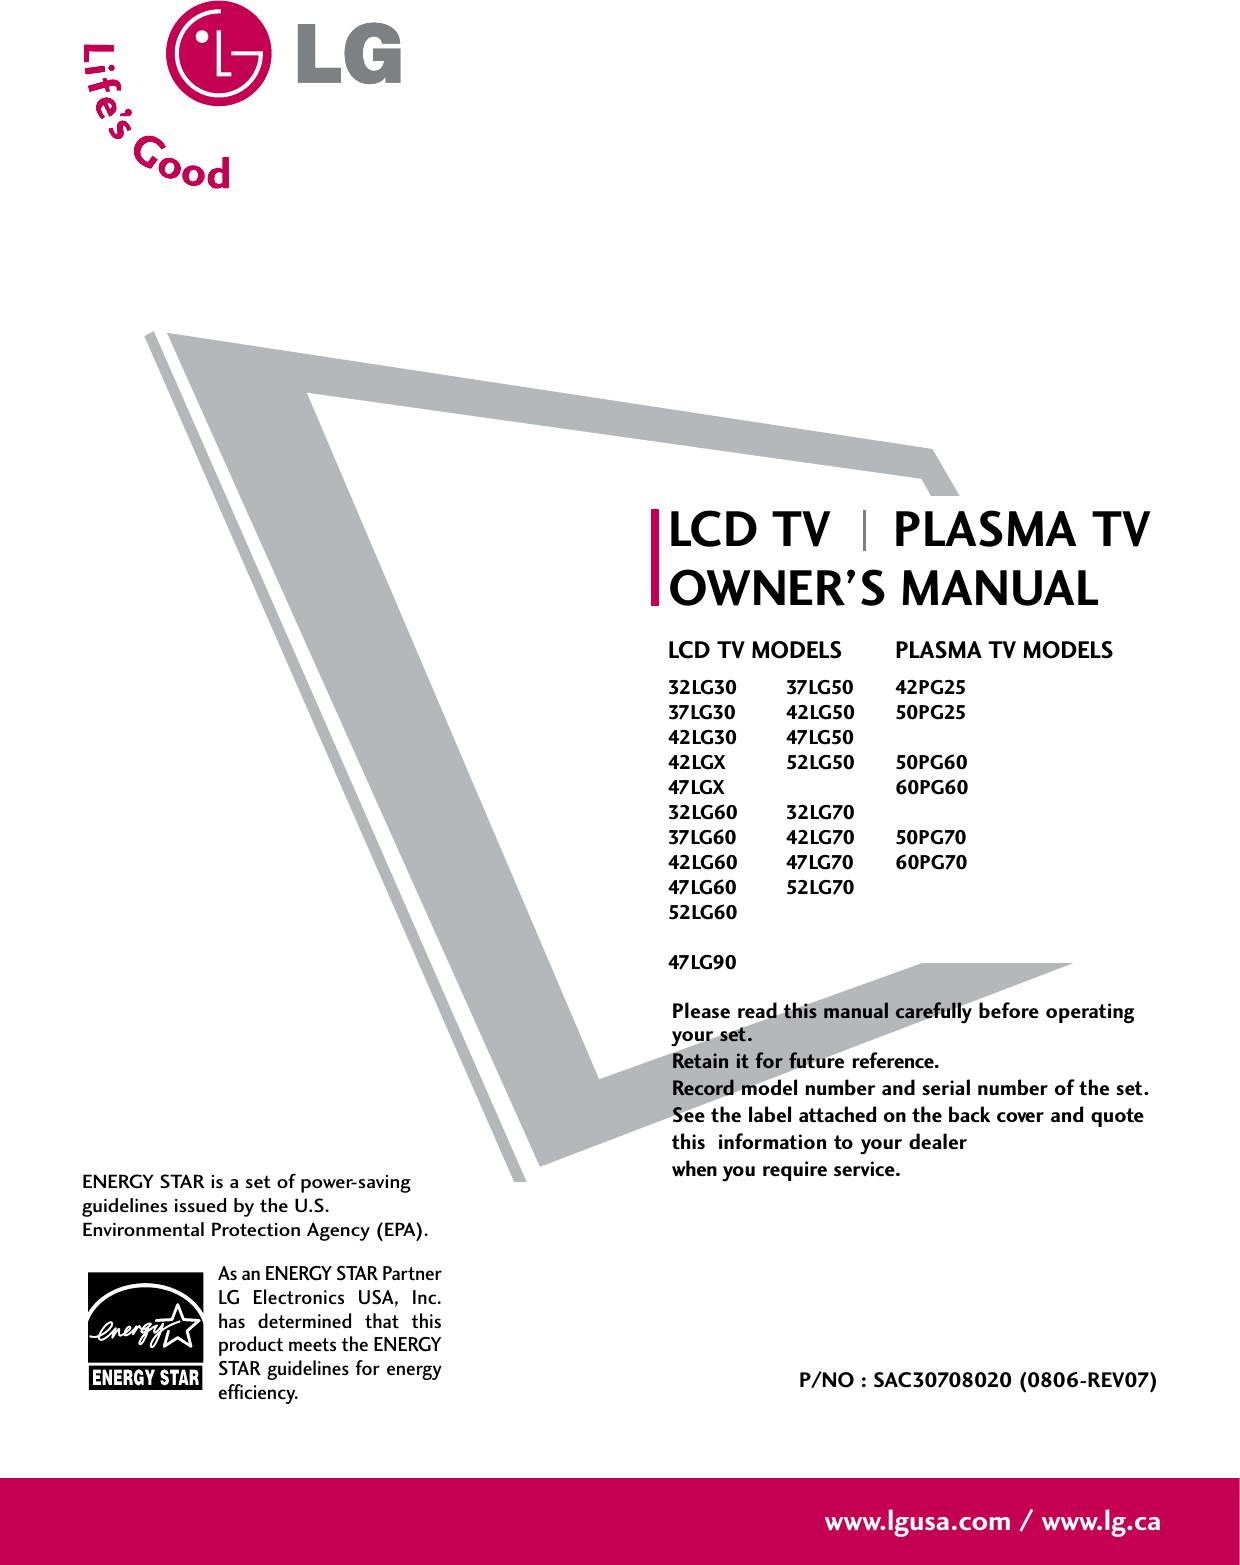 Please read this manual carefully before operatingyour set. Retain it for future reference.Record model number and serial number of the set. See the label attached on the back cover and quote this  information to your dealer when you require service.LCD TV PLASMA TVOWNER’S MANUALLCD TV MODELS32LG30 37LG5037LG30 42LG5042LG30 47LG5042LGX 52LG5047 LGX32LG60 32LG7037LG60 42LG7042LG60 47LG7047LG60 52LG7052LG6047LG90PLASMA TV MODELS42PG2550PG2550PG6060PG6050PG7060PG70P/NO : SAC30708020 (0806-REV07)www.lgusa.com / www.lg.caAs an ENERGY STAR PartnerLG  Electronics  USA,  Inc.has  determined  that  thisproduct meets the ENERGYSTAR guidelines for energyefficiency.ENERGY STAR is a set of power-savingguidelines issued by the U.S.Environmental Protection Agency (EPA).